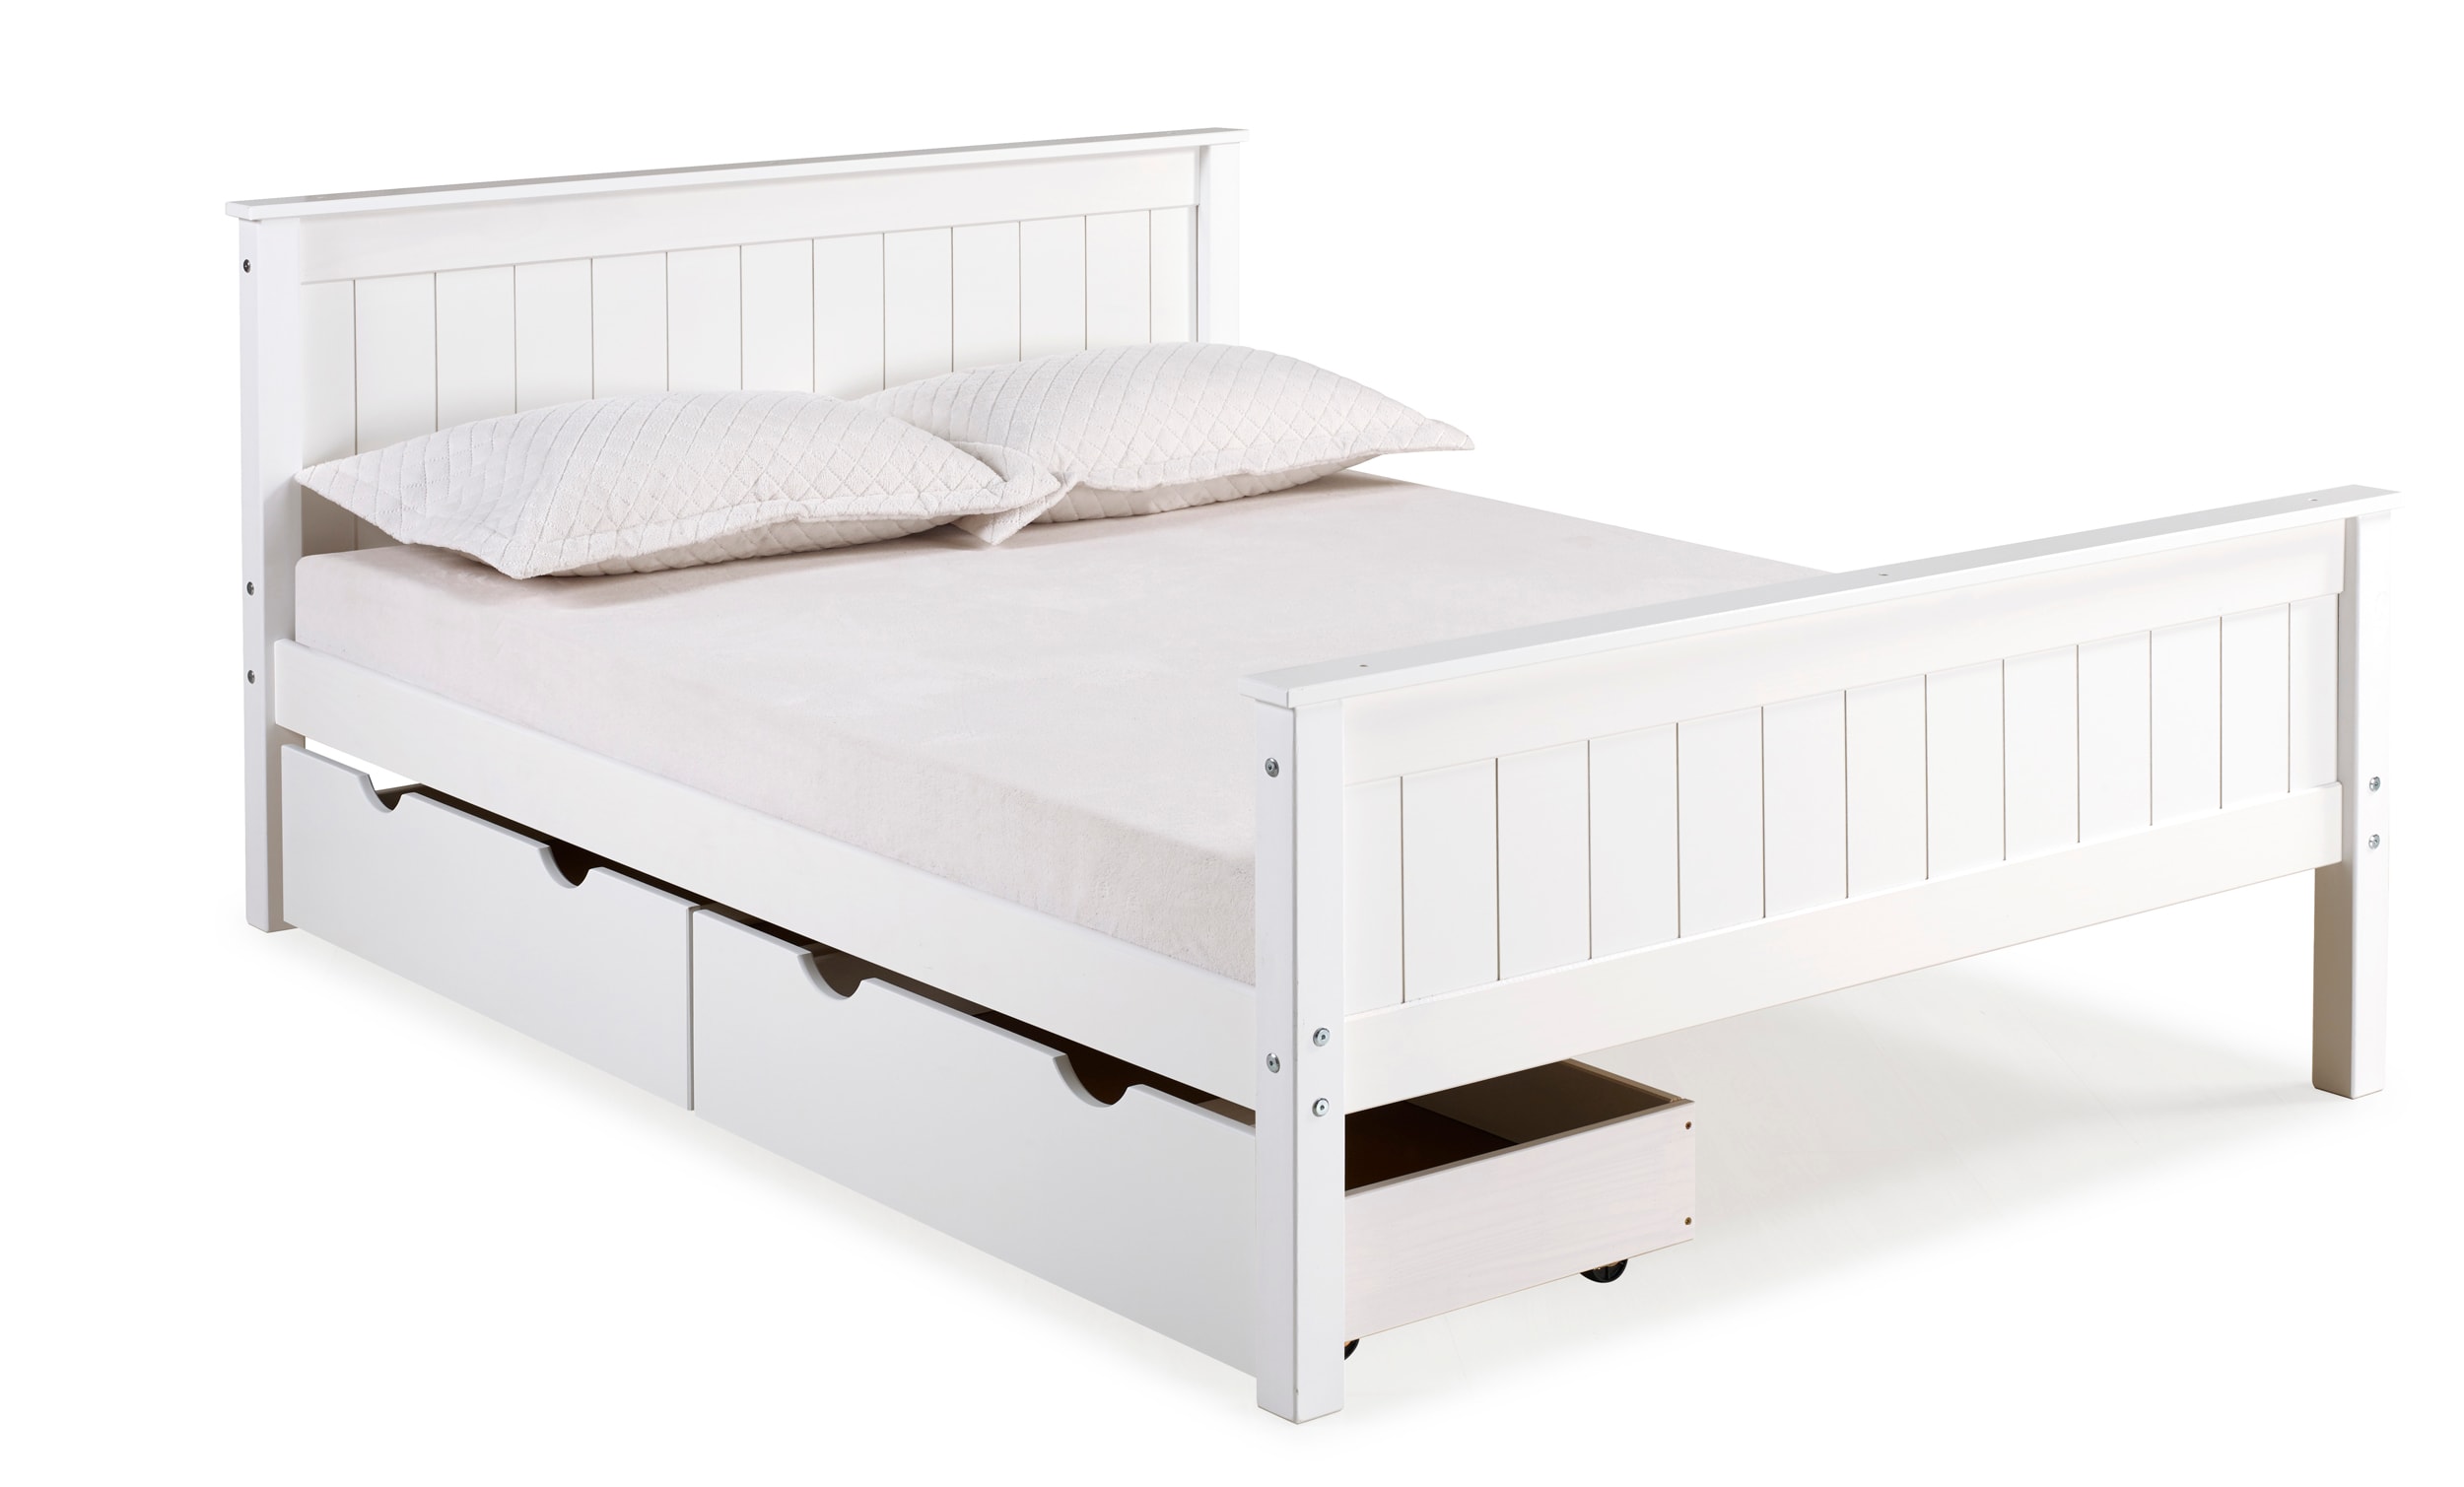 Alaterre Furniture Harmony White Full, Full Bed Frame With Storage White